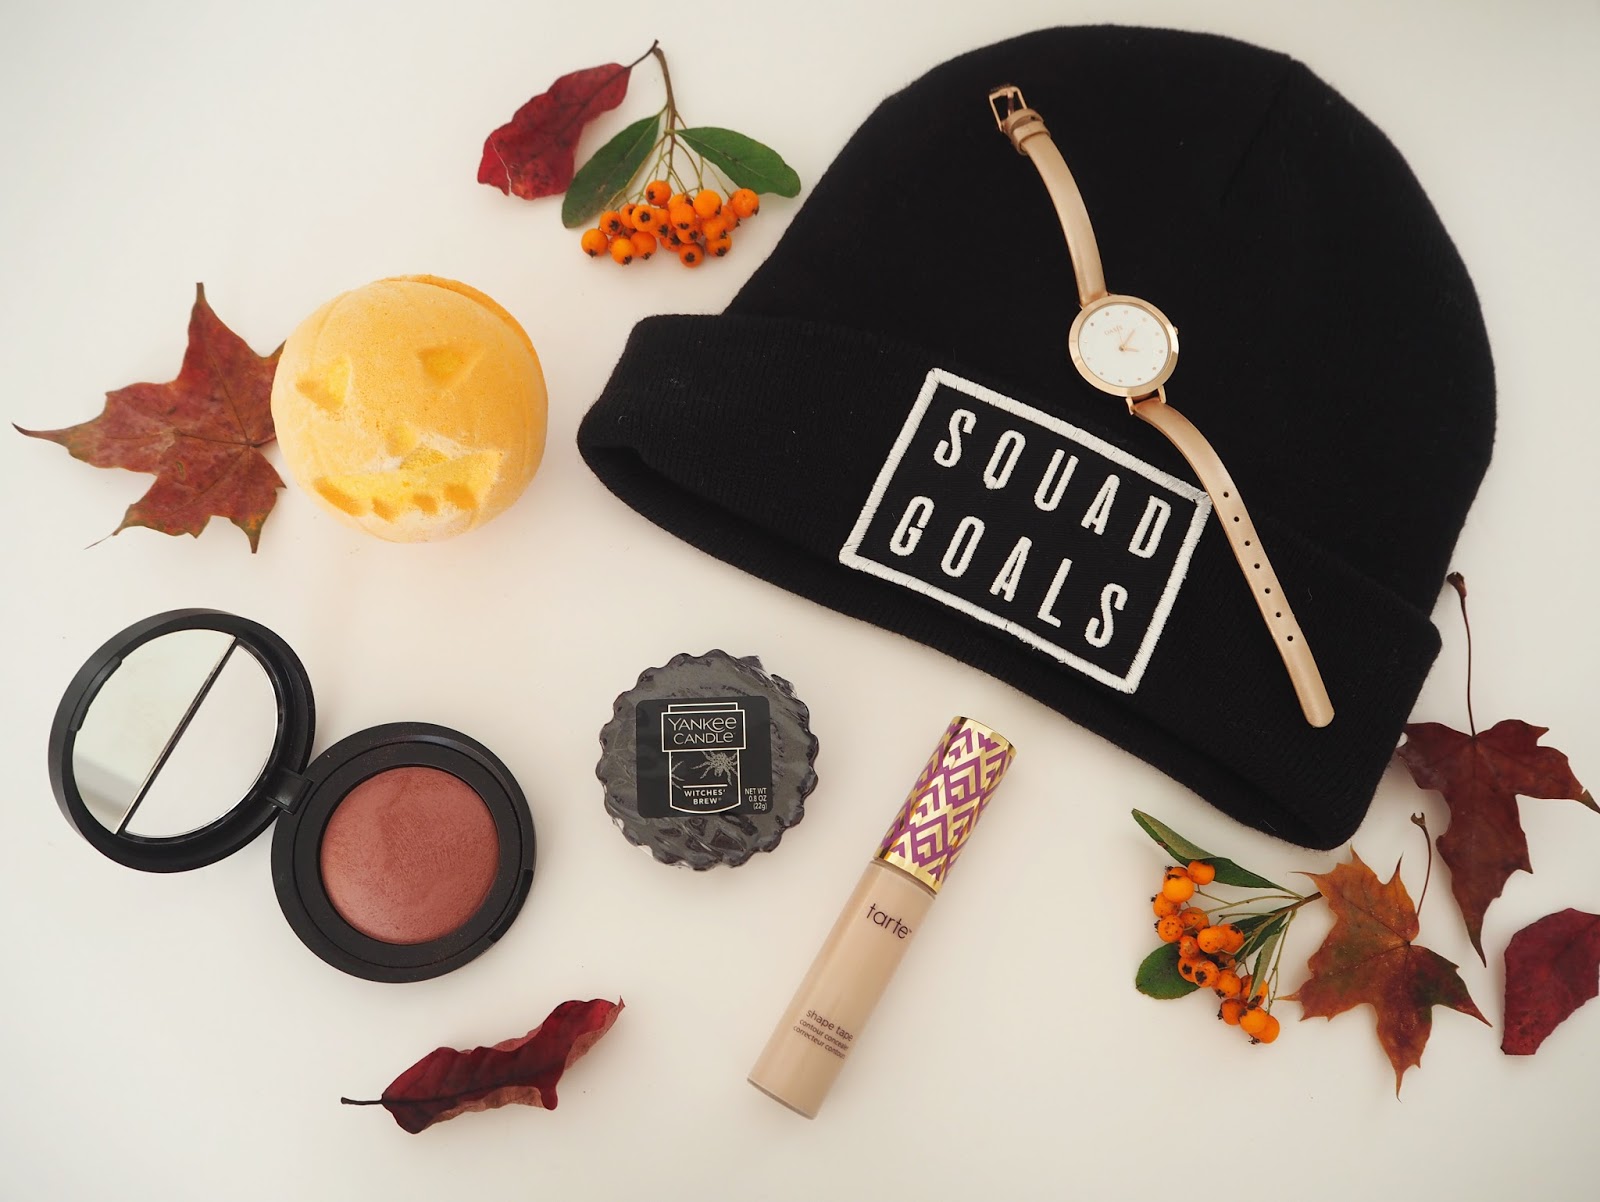 Loves List: October, Katie Kirk Loves, Makeup, Laura Geller, Tarte Cosmetics, Oasis Fashion, Rose Gold Watch, River Island Hat, Squad Goals Hat, Yankee Candles, Lush Cosmetics, Beauty Blogger, UK Fashion Blogger